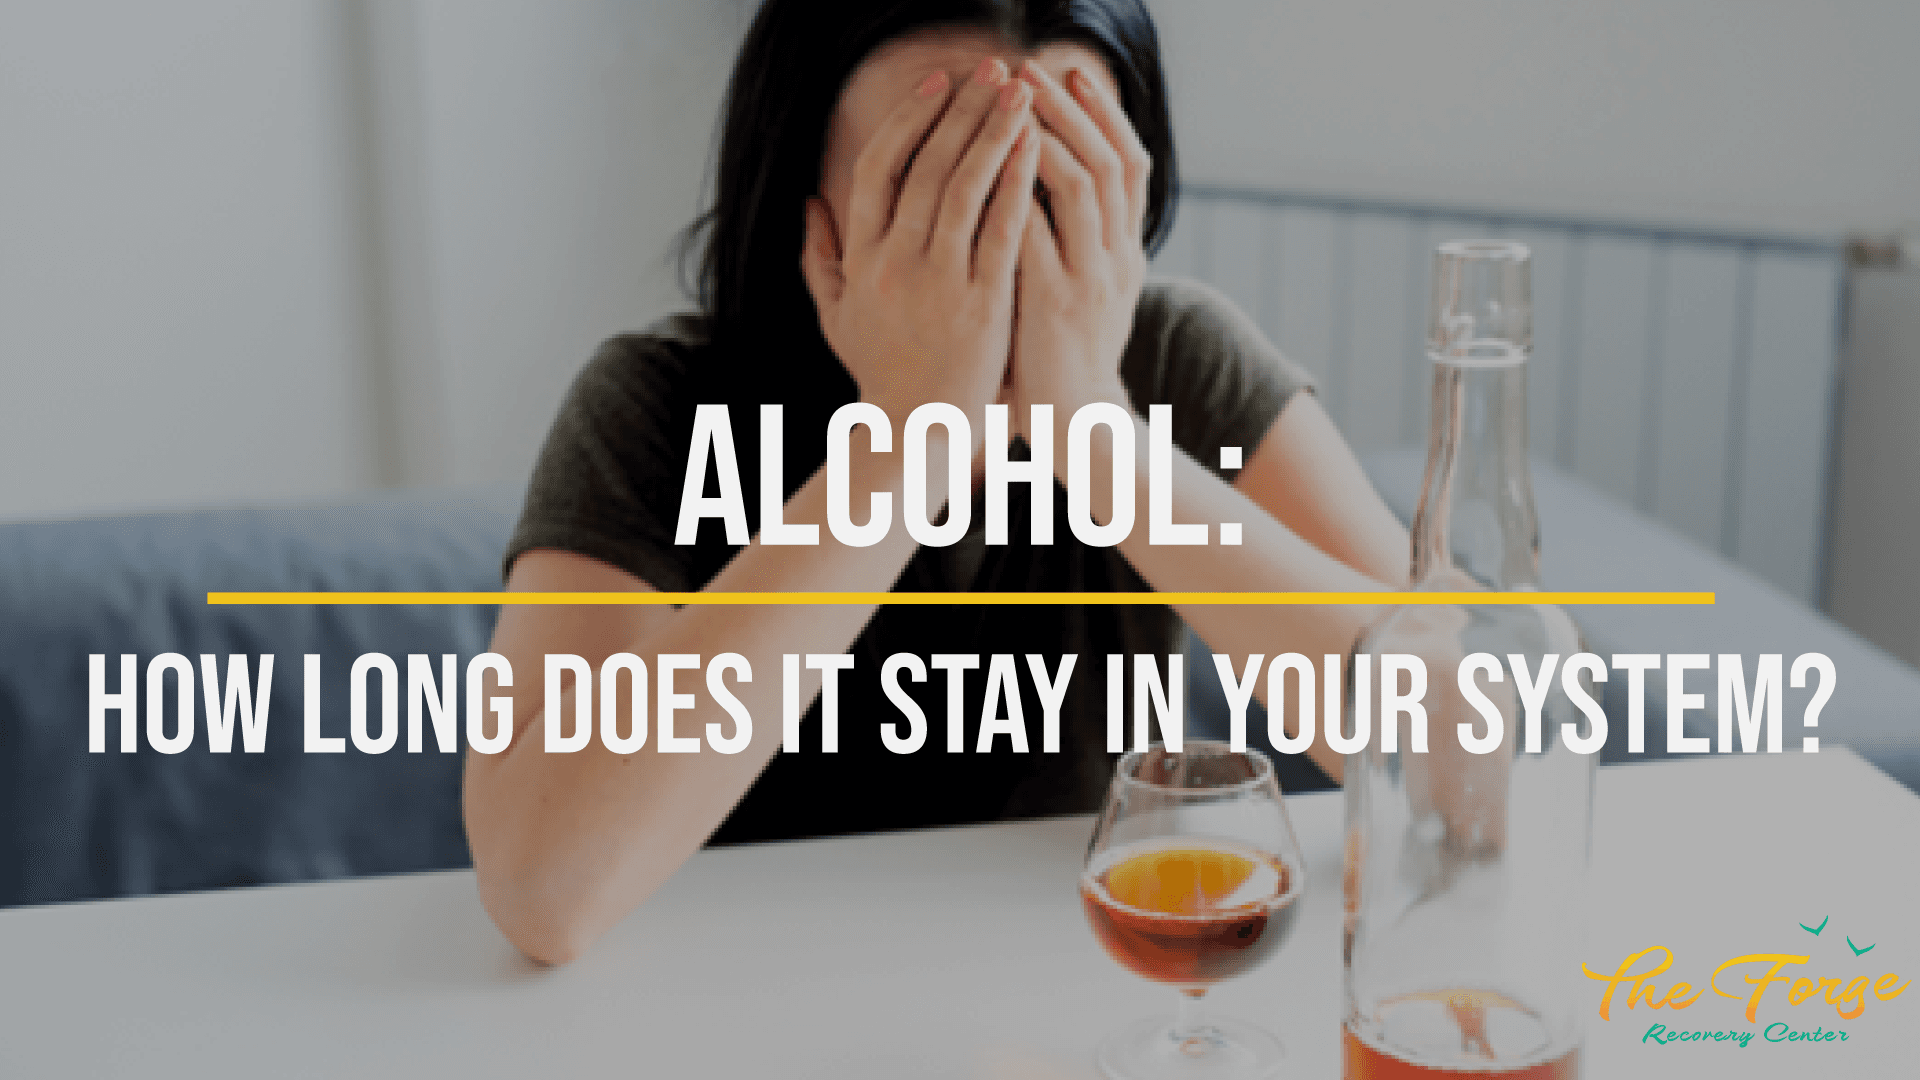 How Long Does Alcohol Stay in Your System? What You Need to Know